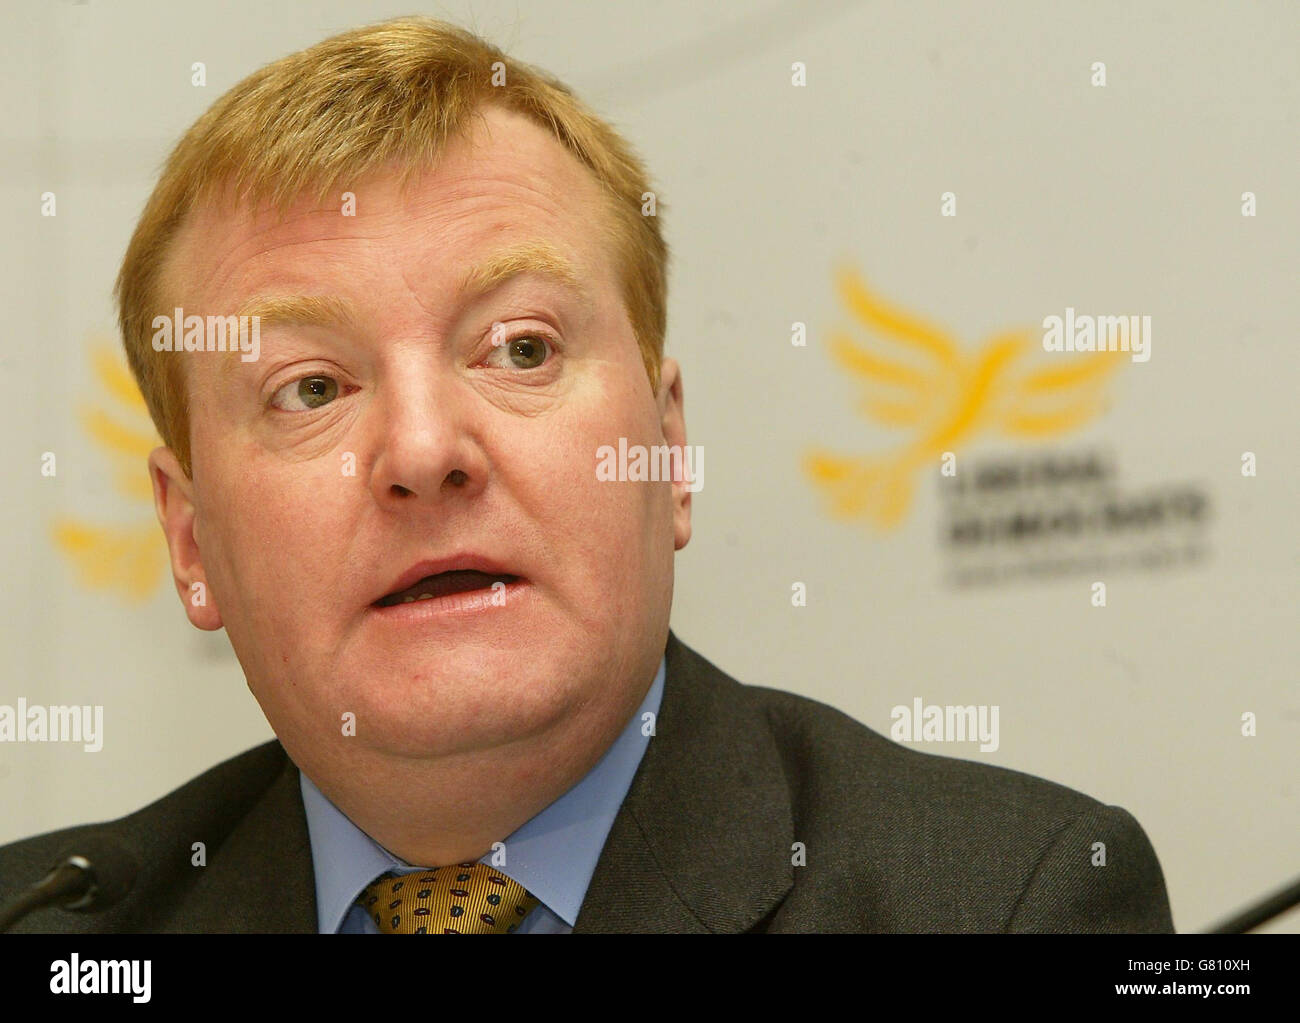 Liberal Democrat leader Charles Kennedy at a news conference where he met Stephen Wilkinson who until Monday was Labour's candidate for Ribble Valley and a Labour member of Lancashire County Council and who has defected to the Liberal Democrats. Mr Wilkinson has said that he had become disillusioned with Tony Blair's 'increasingly authoritarian' party. Stock Photo